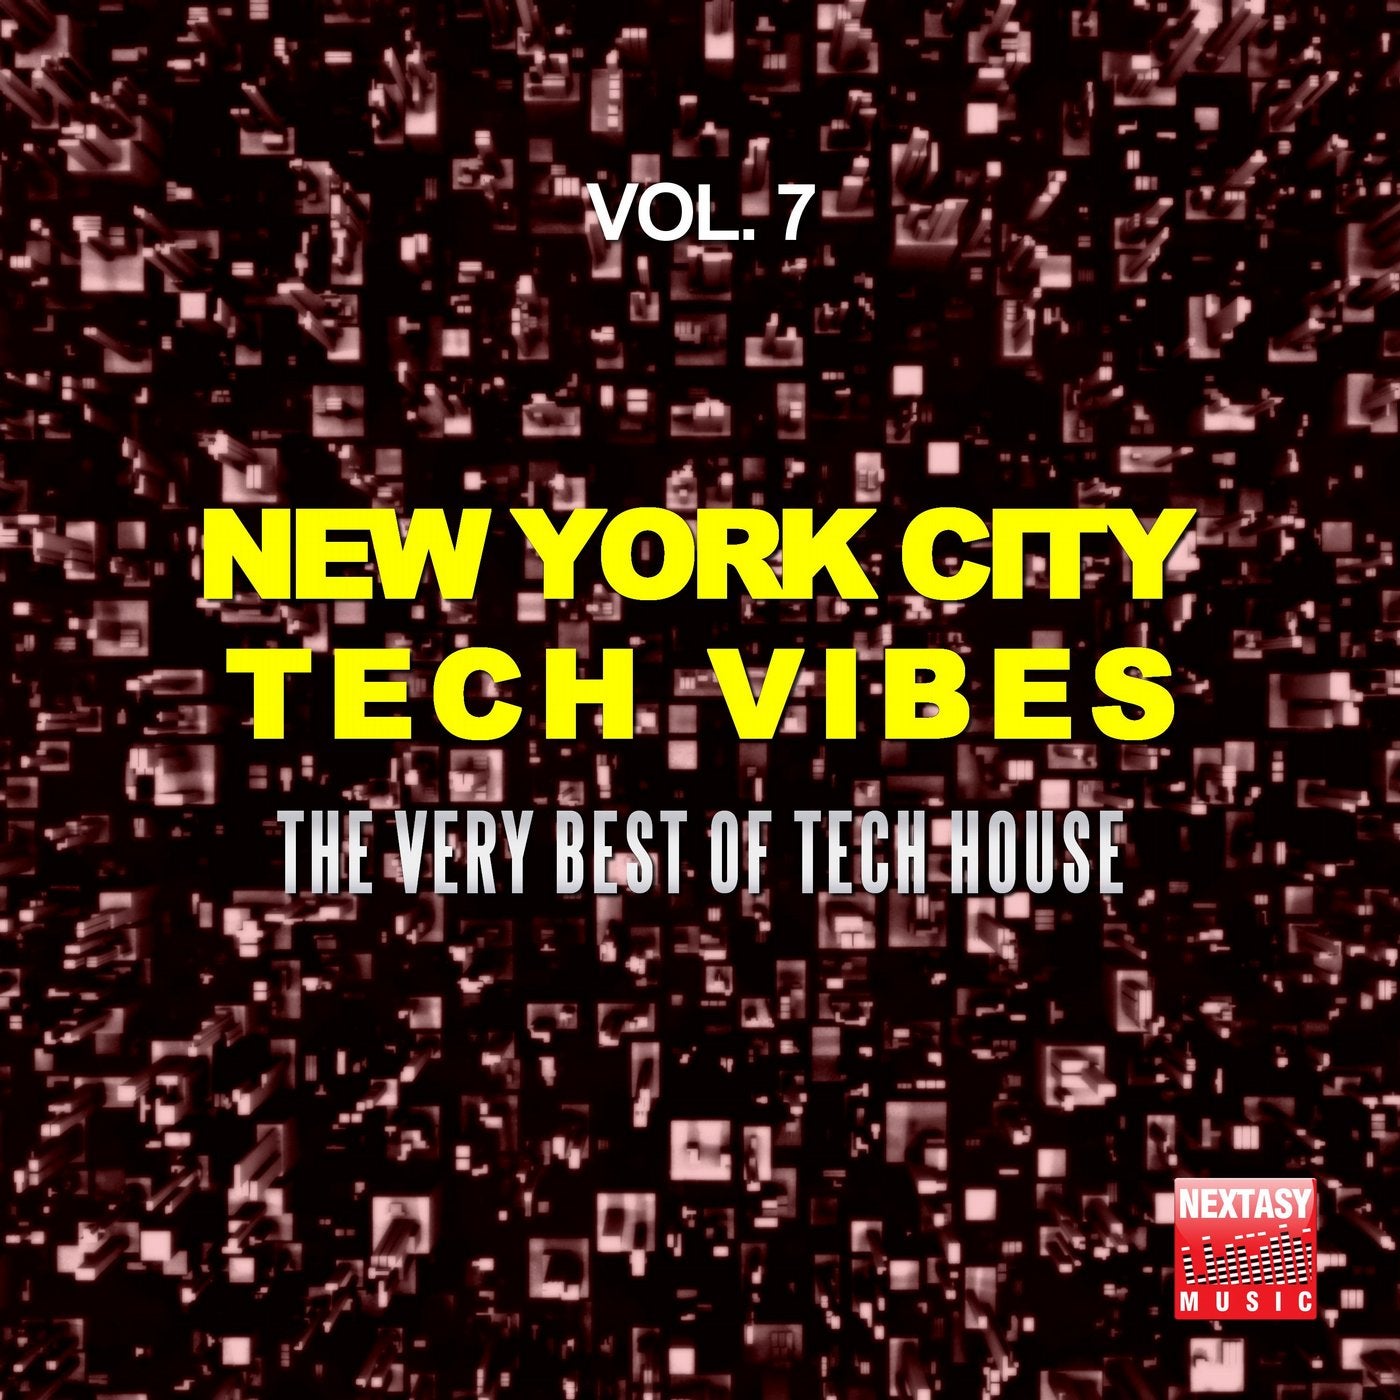 New York City Tech Vibes, Vol. 7 (The Very Best Of Tech House)